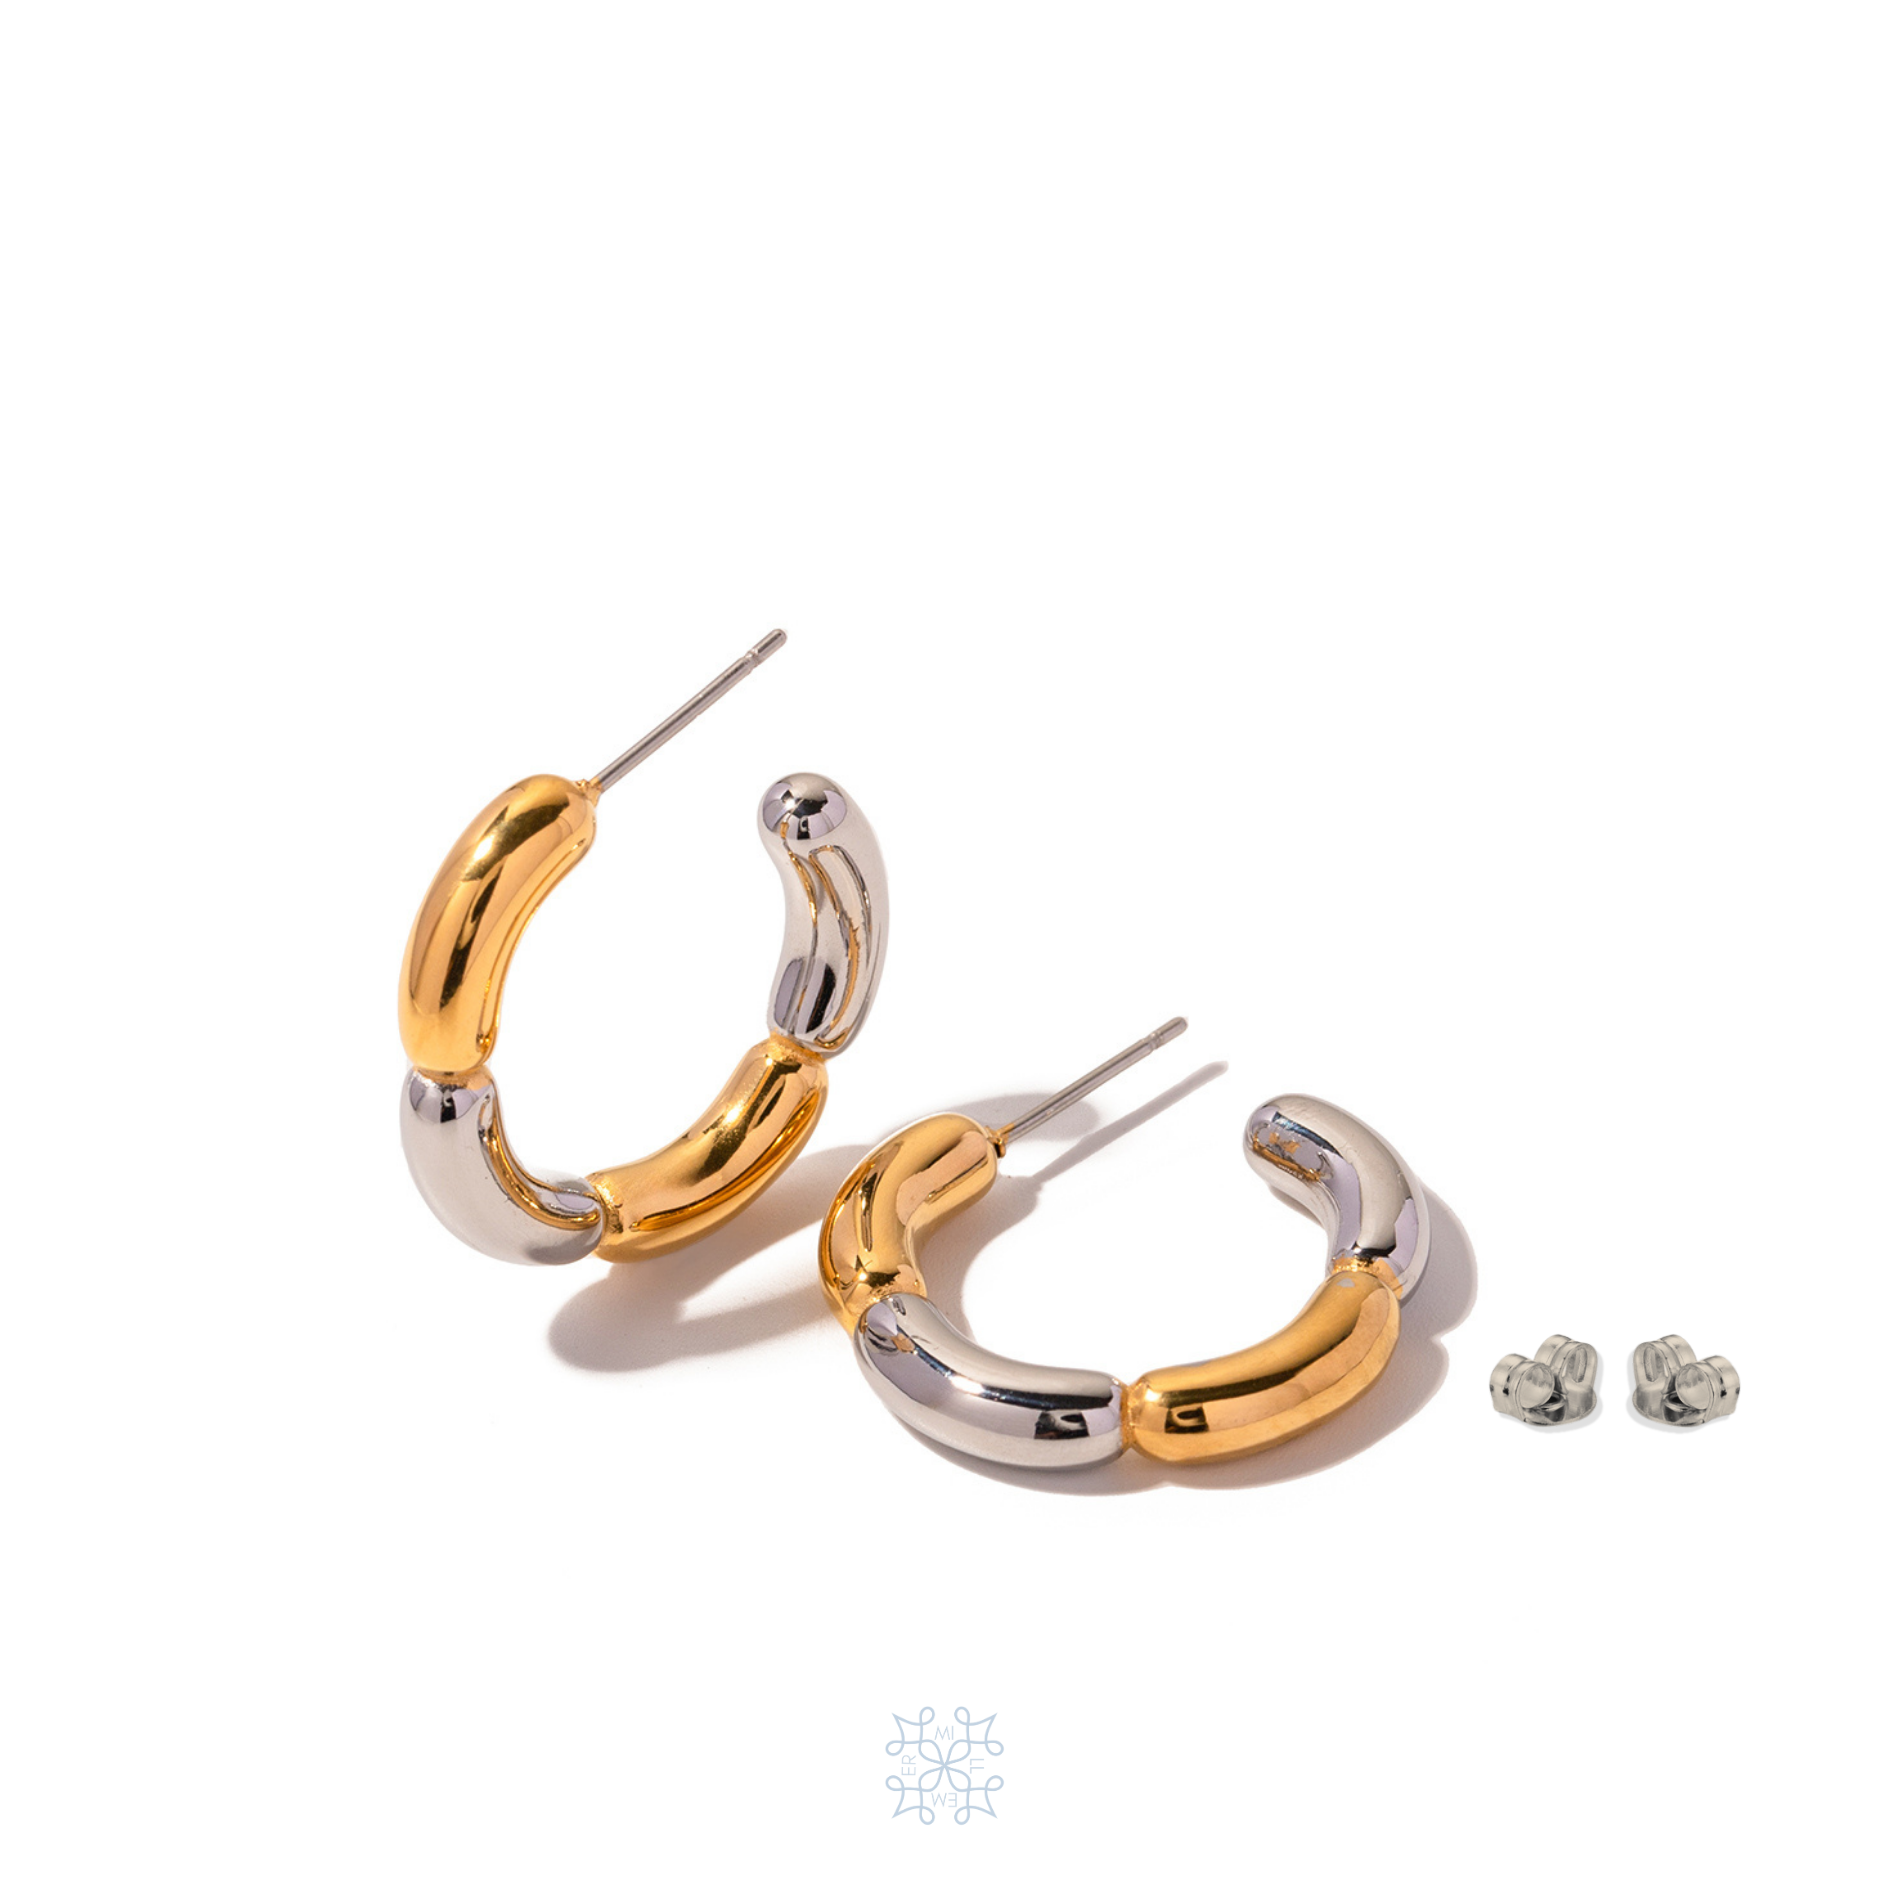 Gold and Silver Hoop earrings divided on chunky segments plated in gold and silver creating a flower shape.